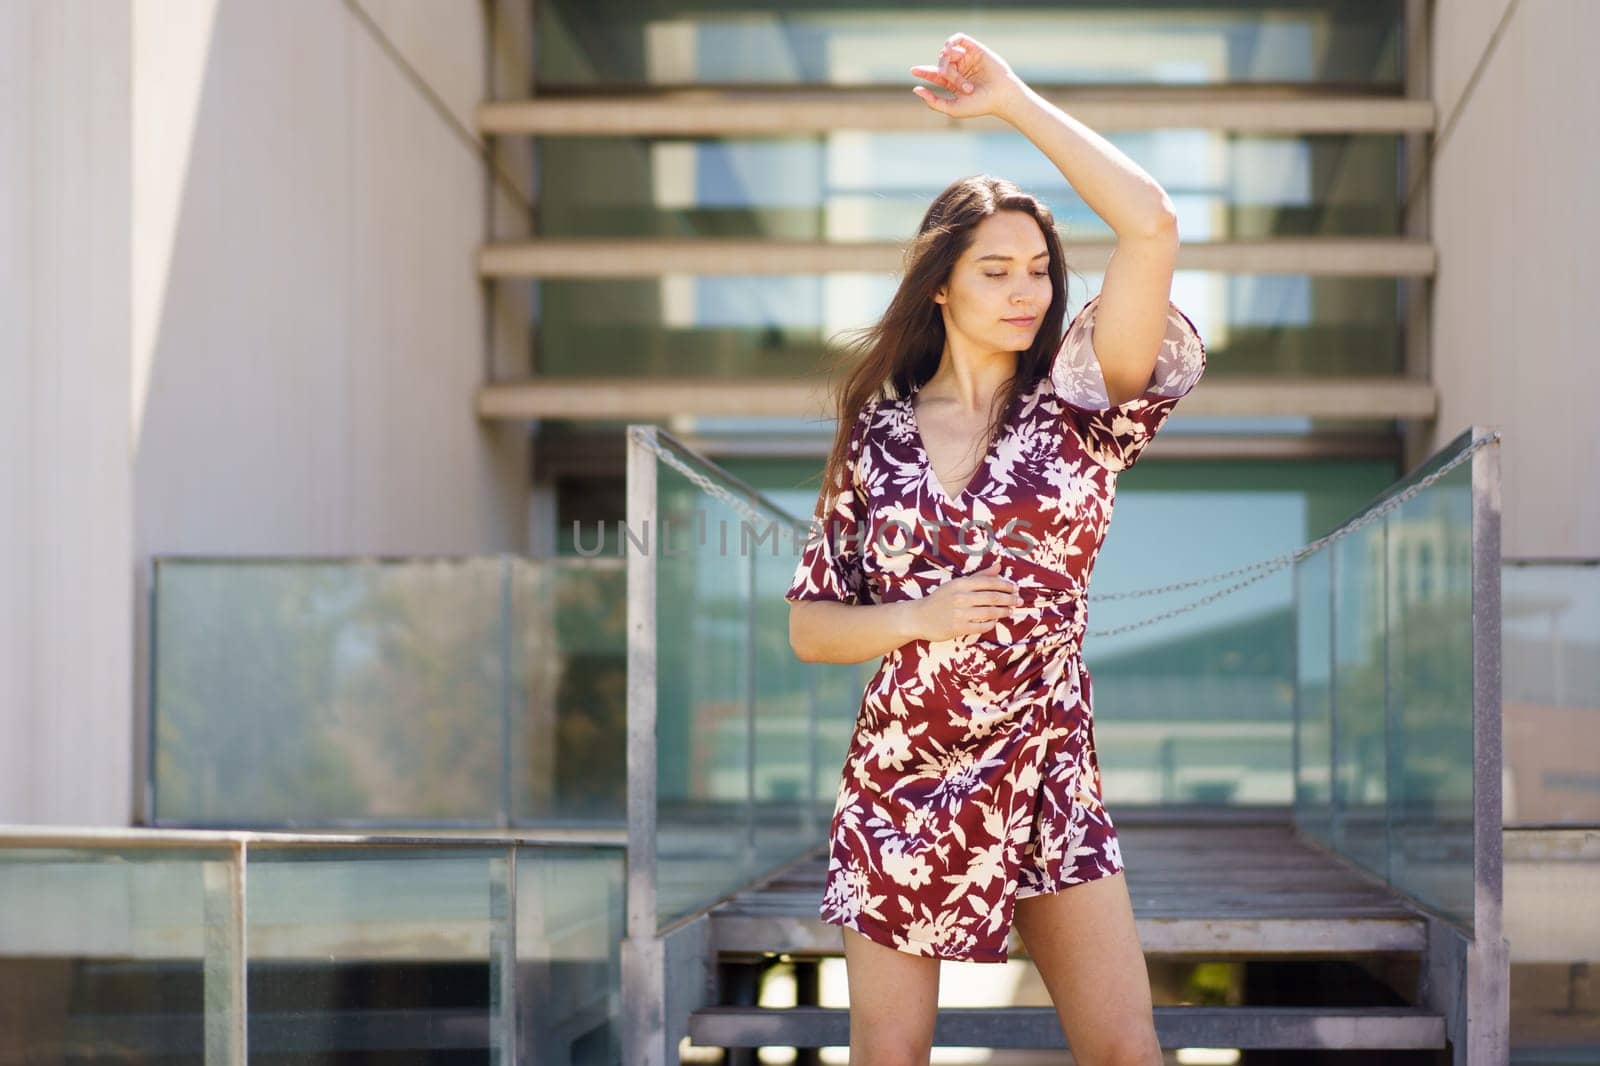 Energetic female dancing a choreography wearing summer dress outdoors in the street